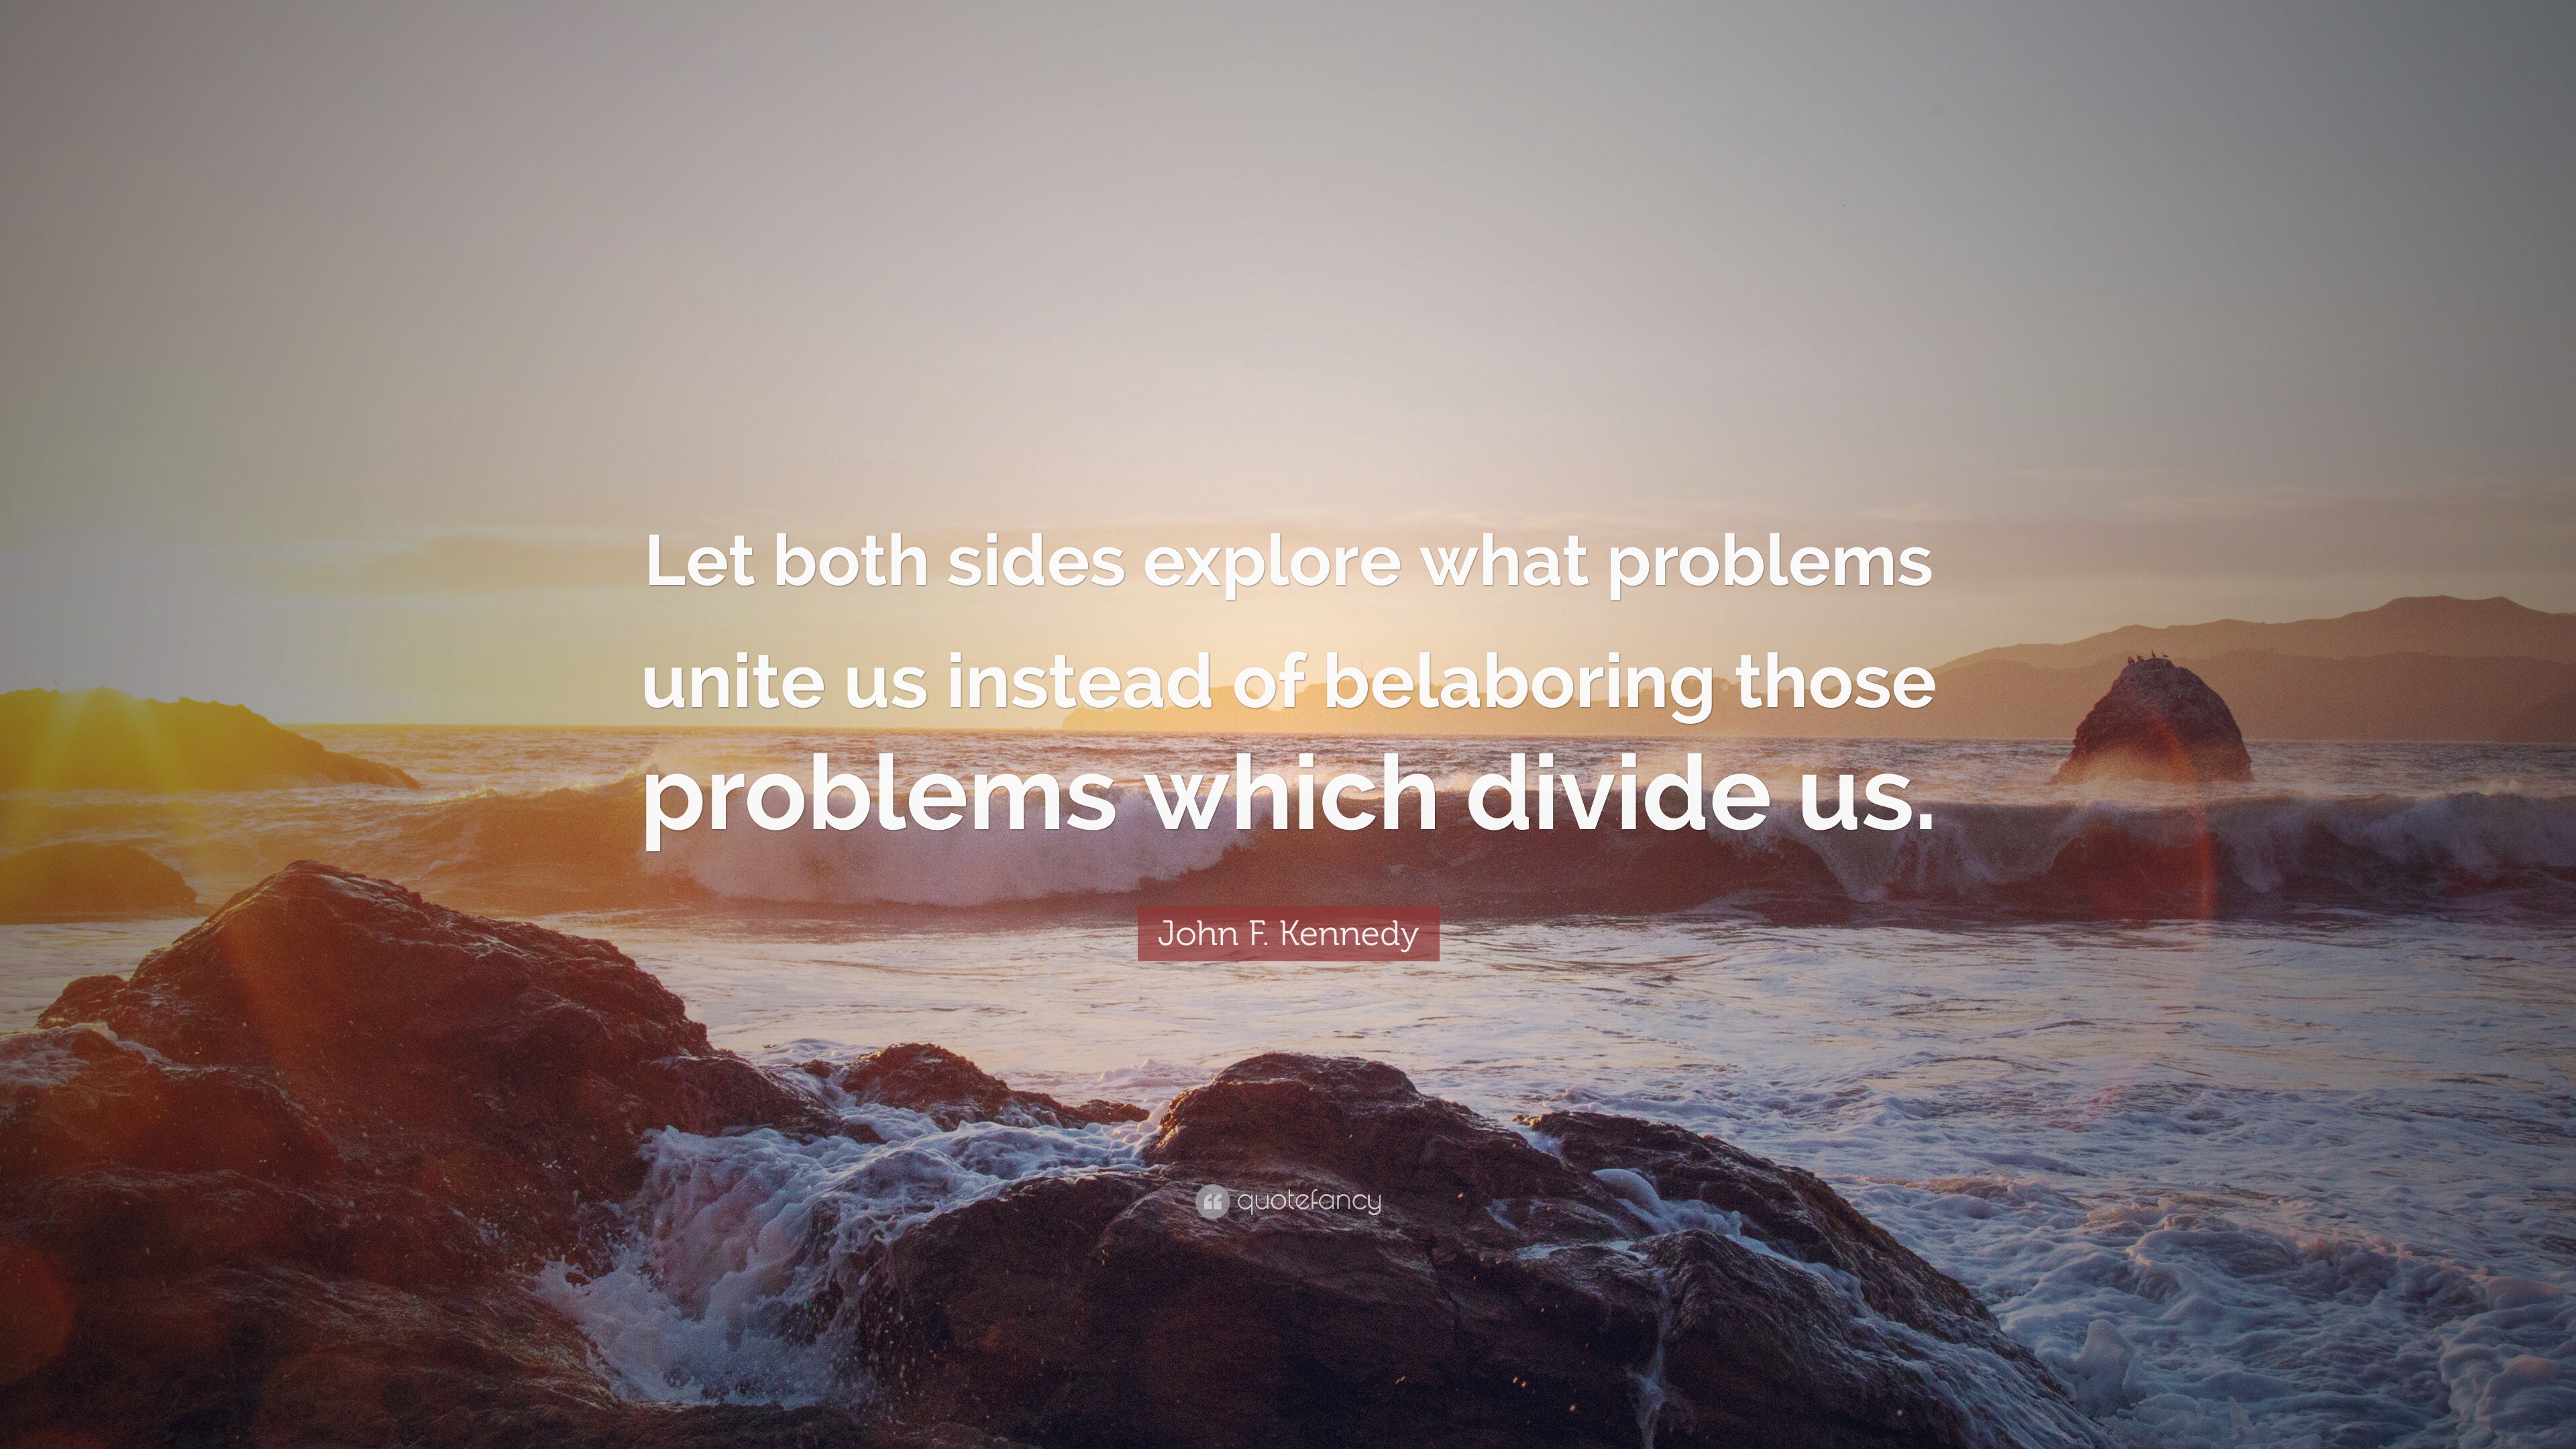 https://quotefancy.com/media/wallpaper/3840x2160/4925968-John-F-Kennedy-Quote-Let-both-sides-explore-what-problems-unite-us.jpg